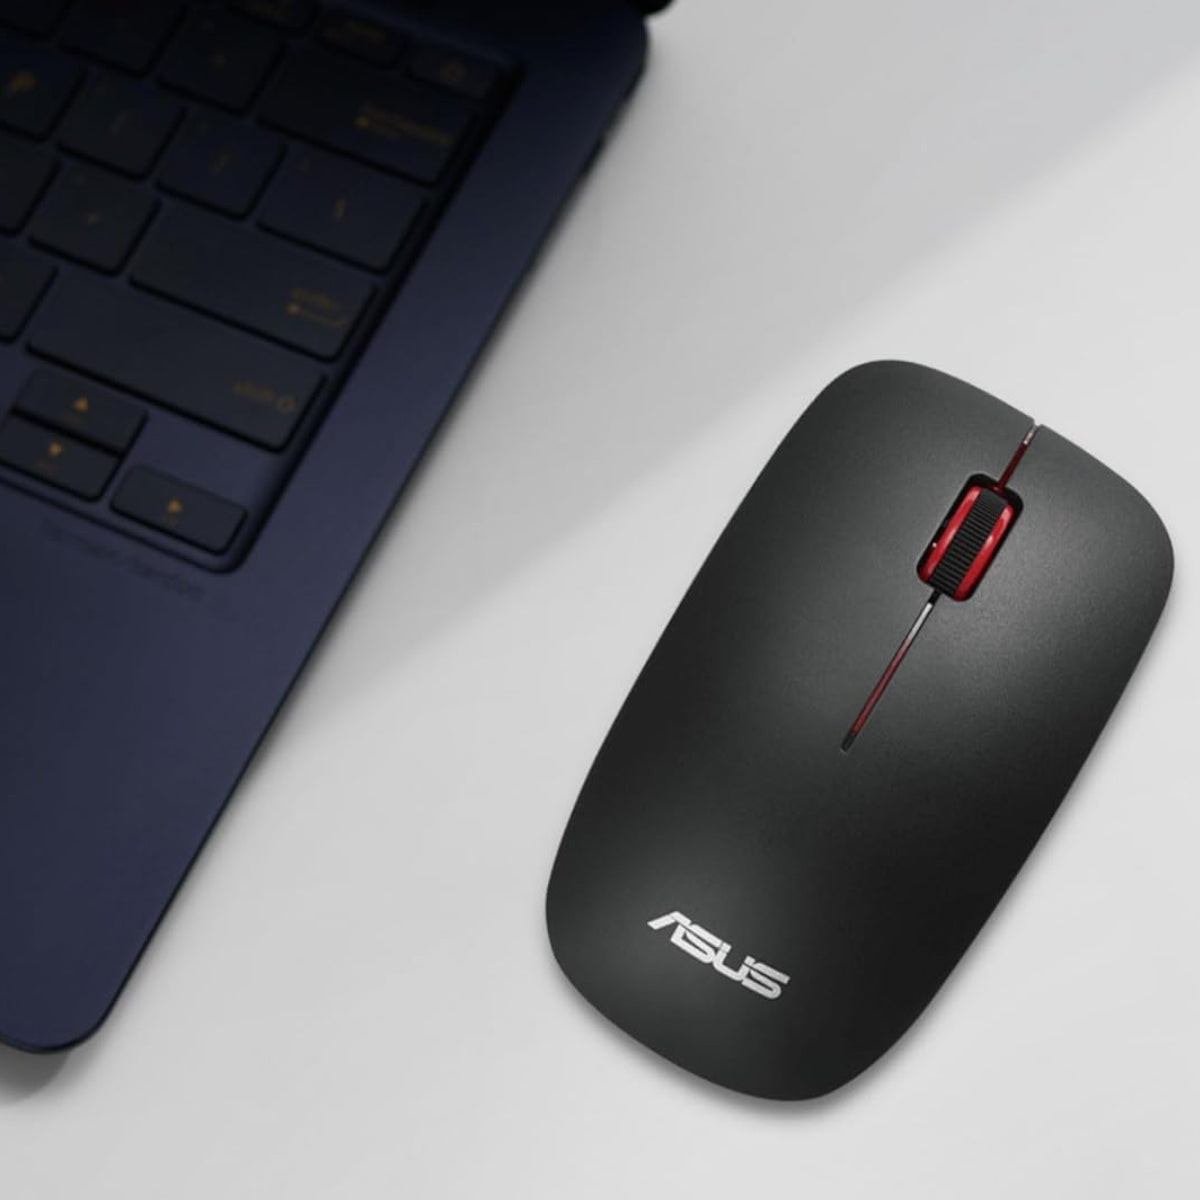 asus-wt300-wireless-mouse-2-4ghz-1600dpi